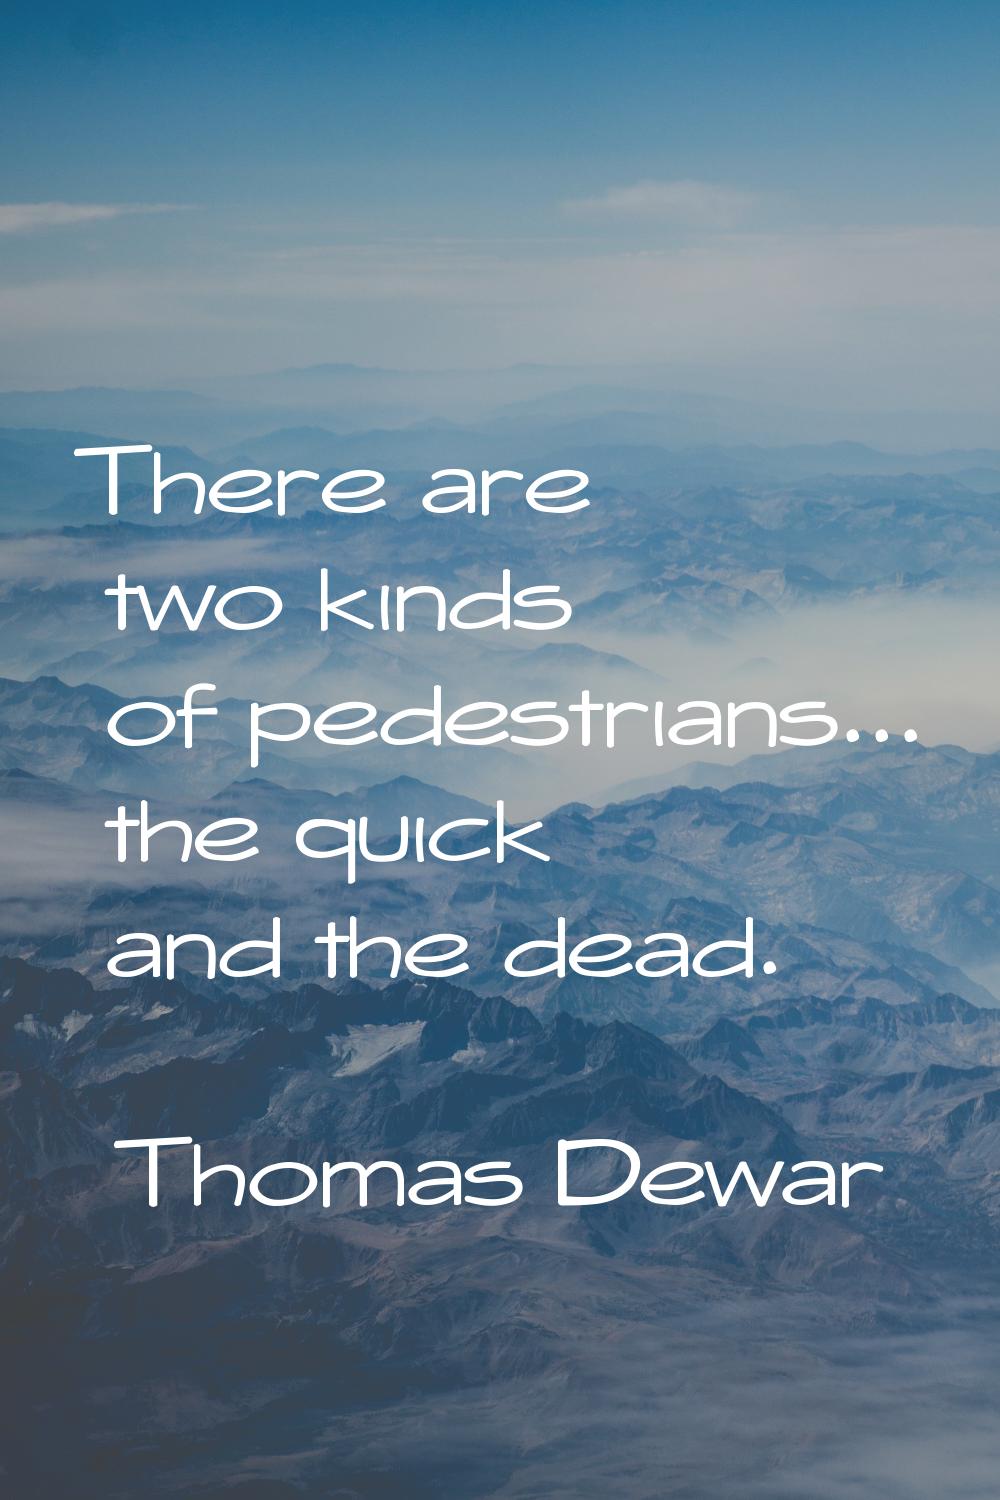 There are two kinds of pedestrians... the quick and the dead.